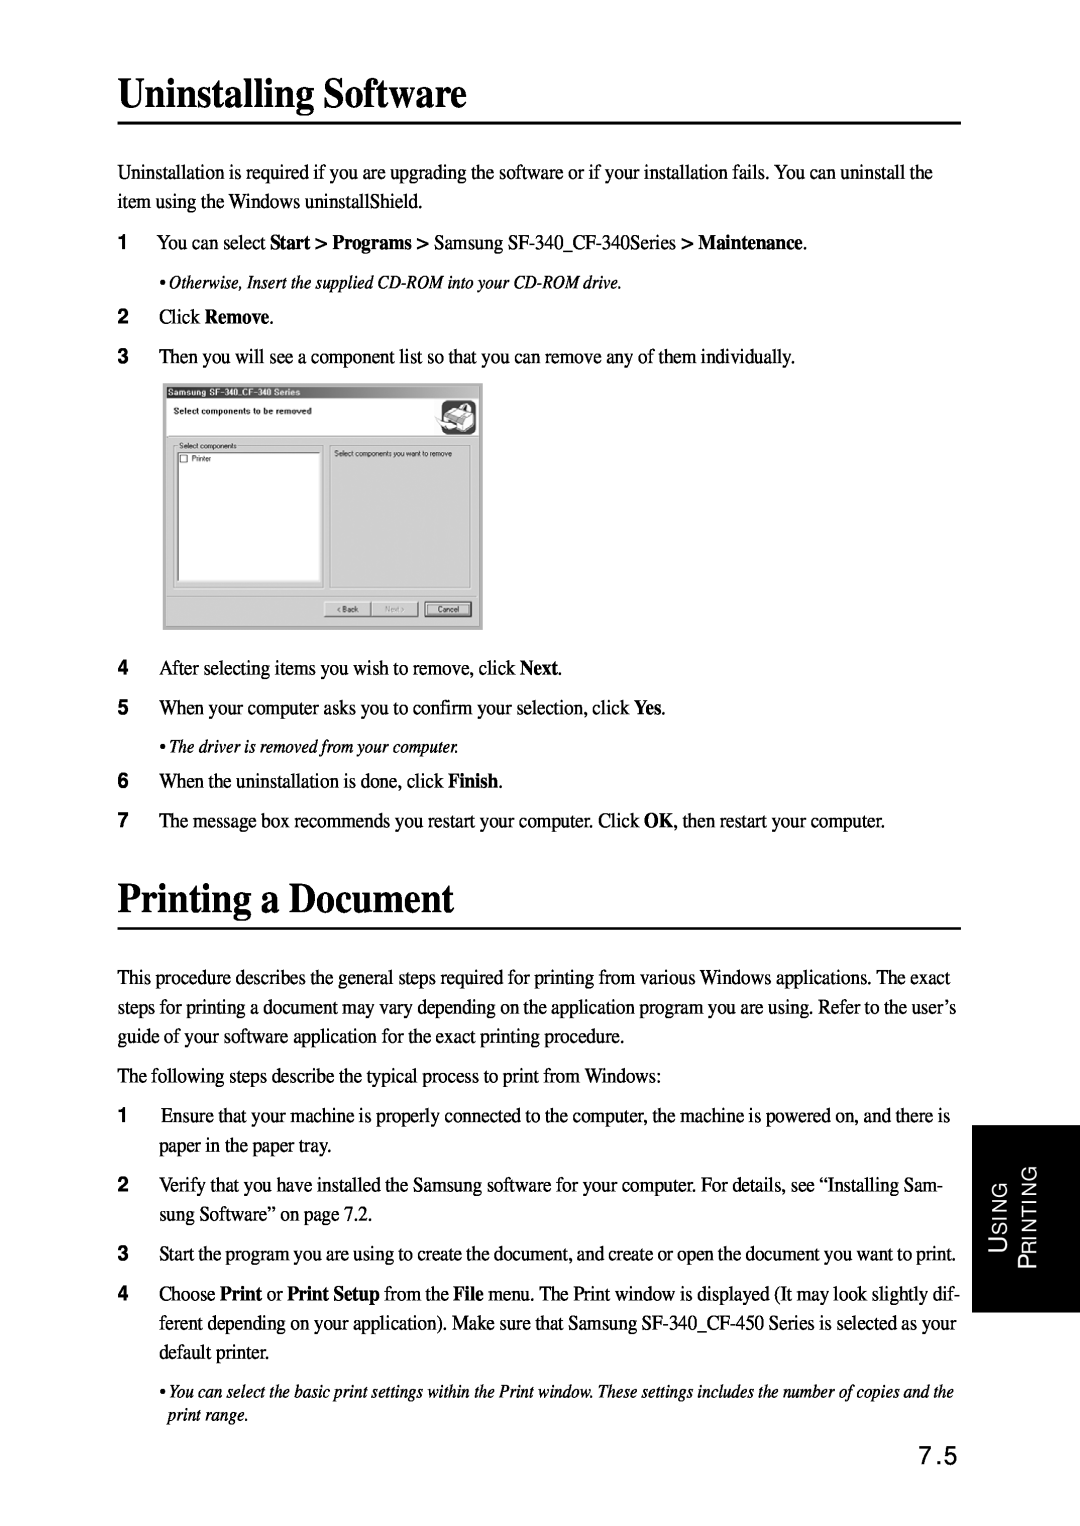 Samsung SF-340 Series manual Uninstalling Software, Printing a Document 